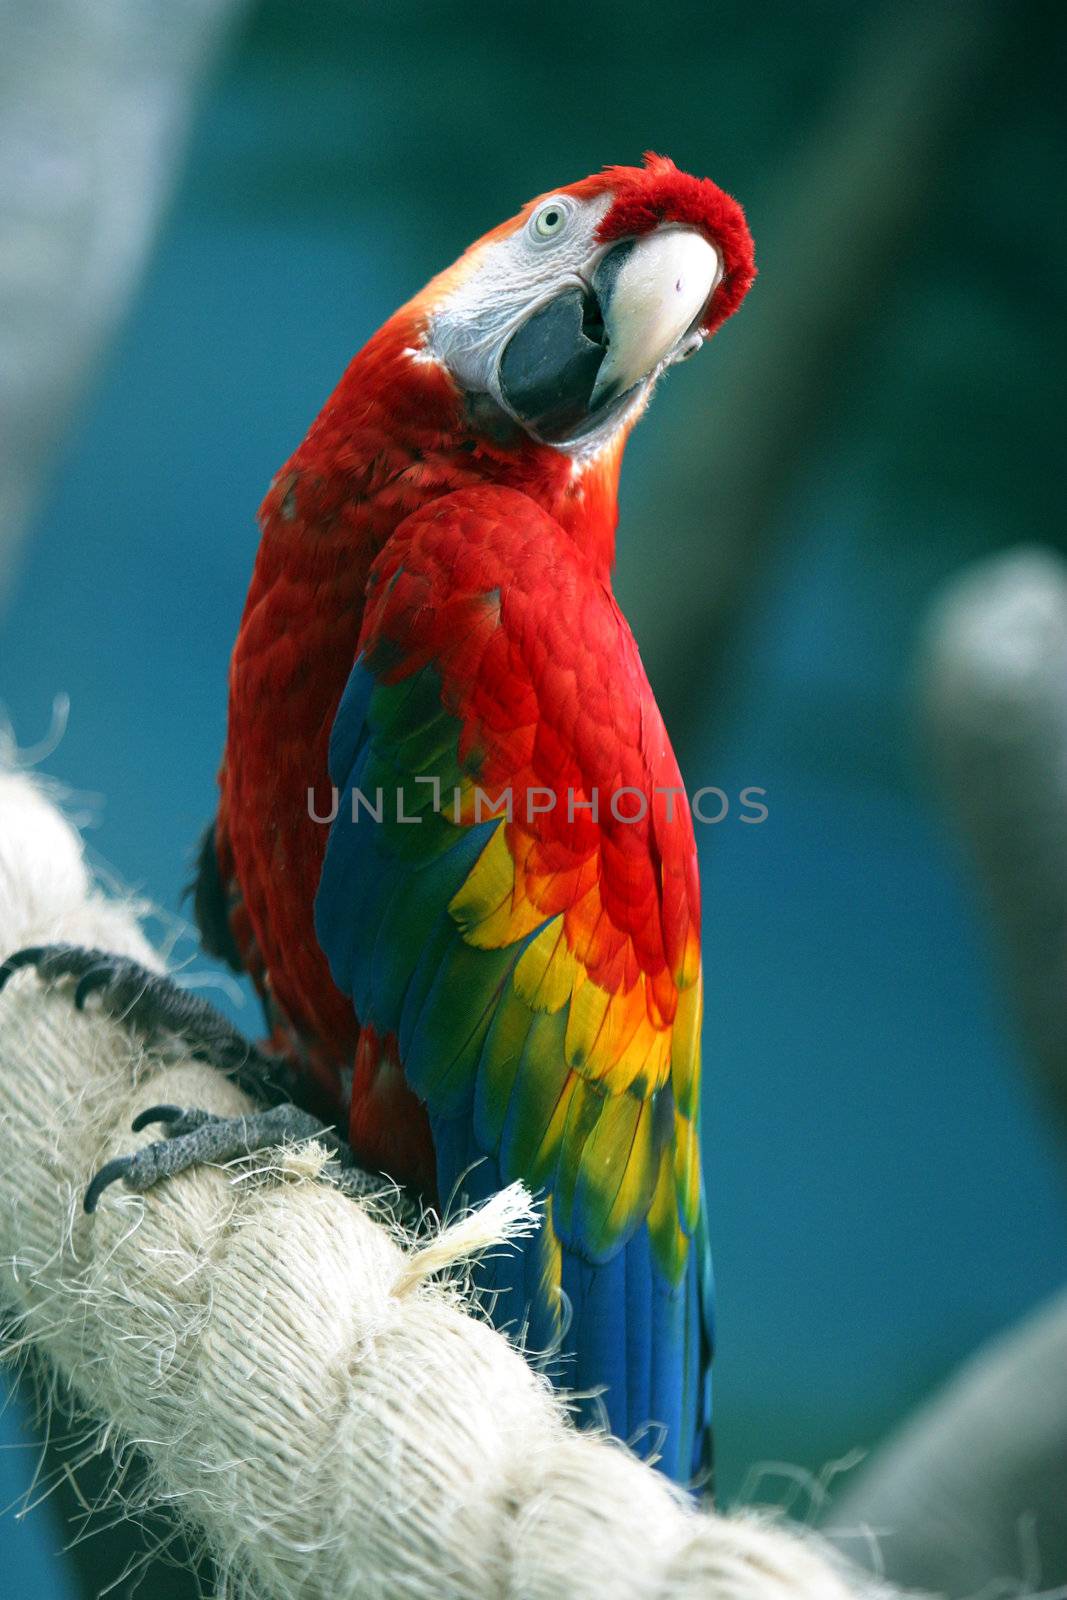 Parrot on a rope by friday